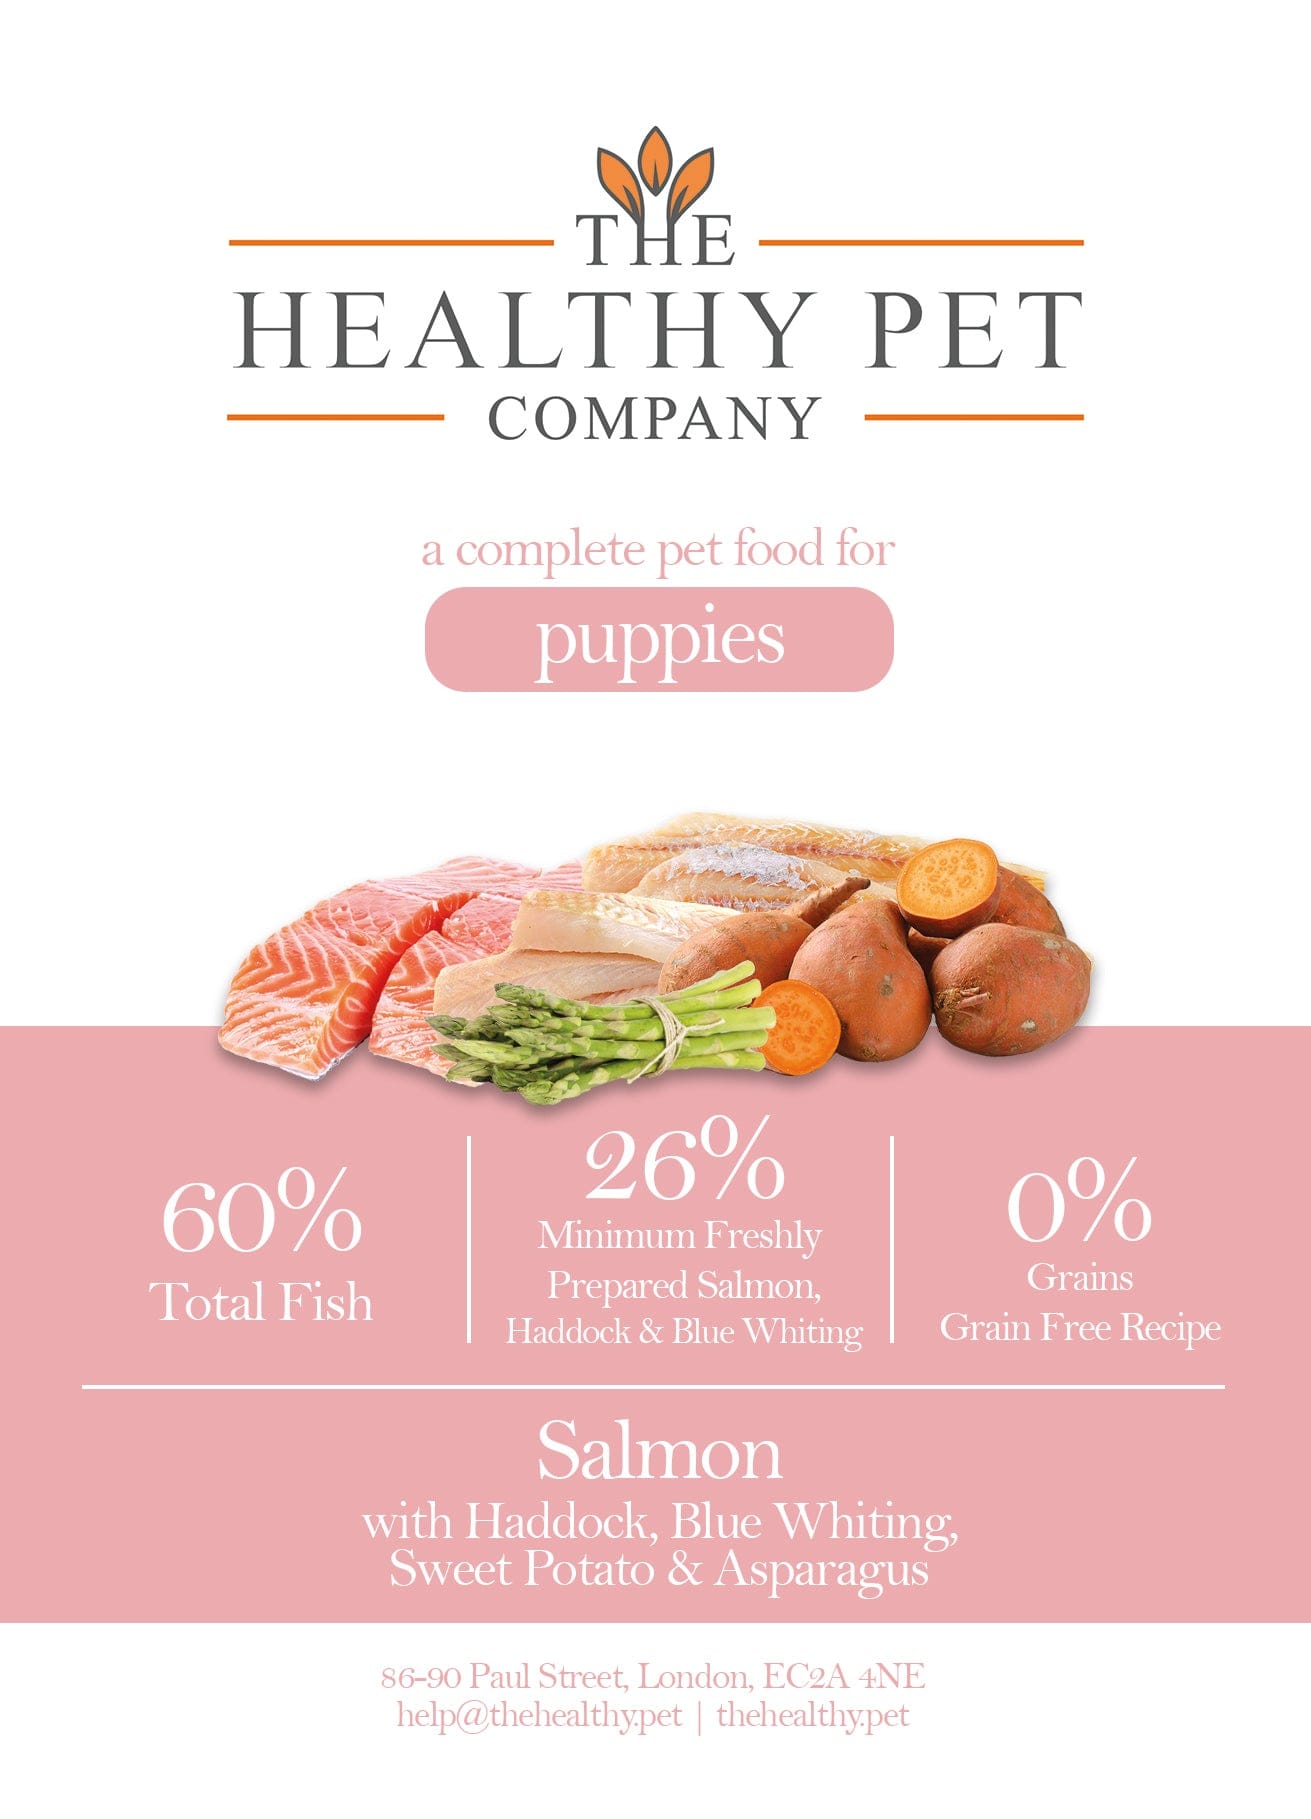 The Healthy Pet Company Complete Meal - Salmon & Haddock with Sweet Potato for Puppies - The Healthy Pet Company